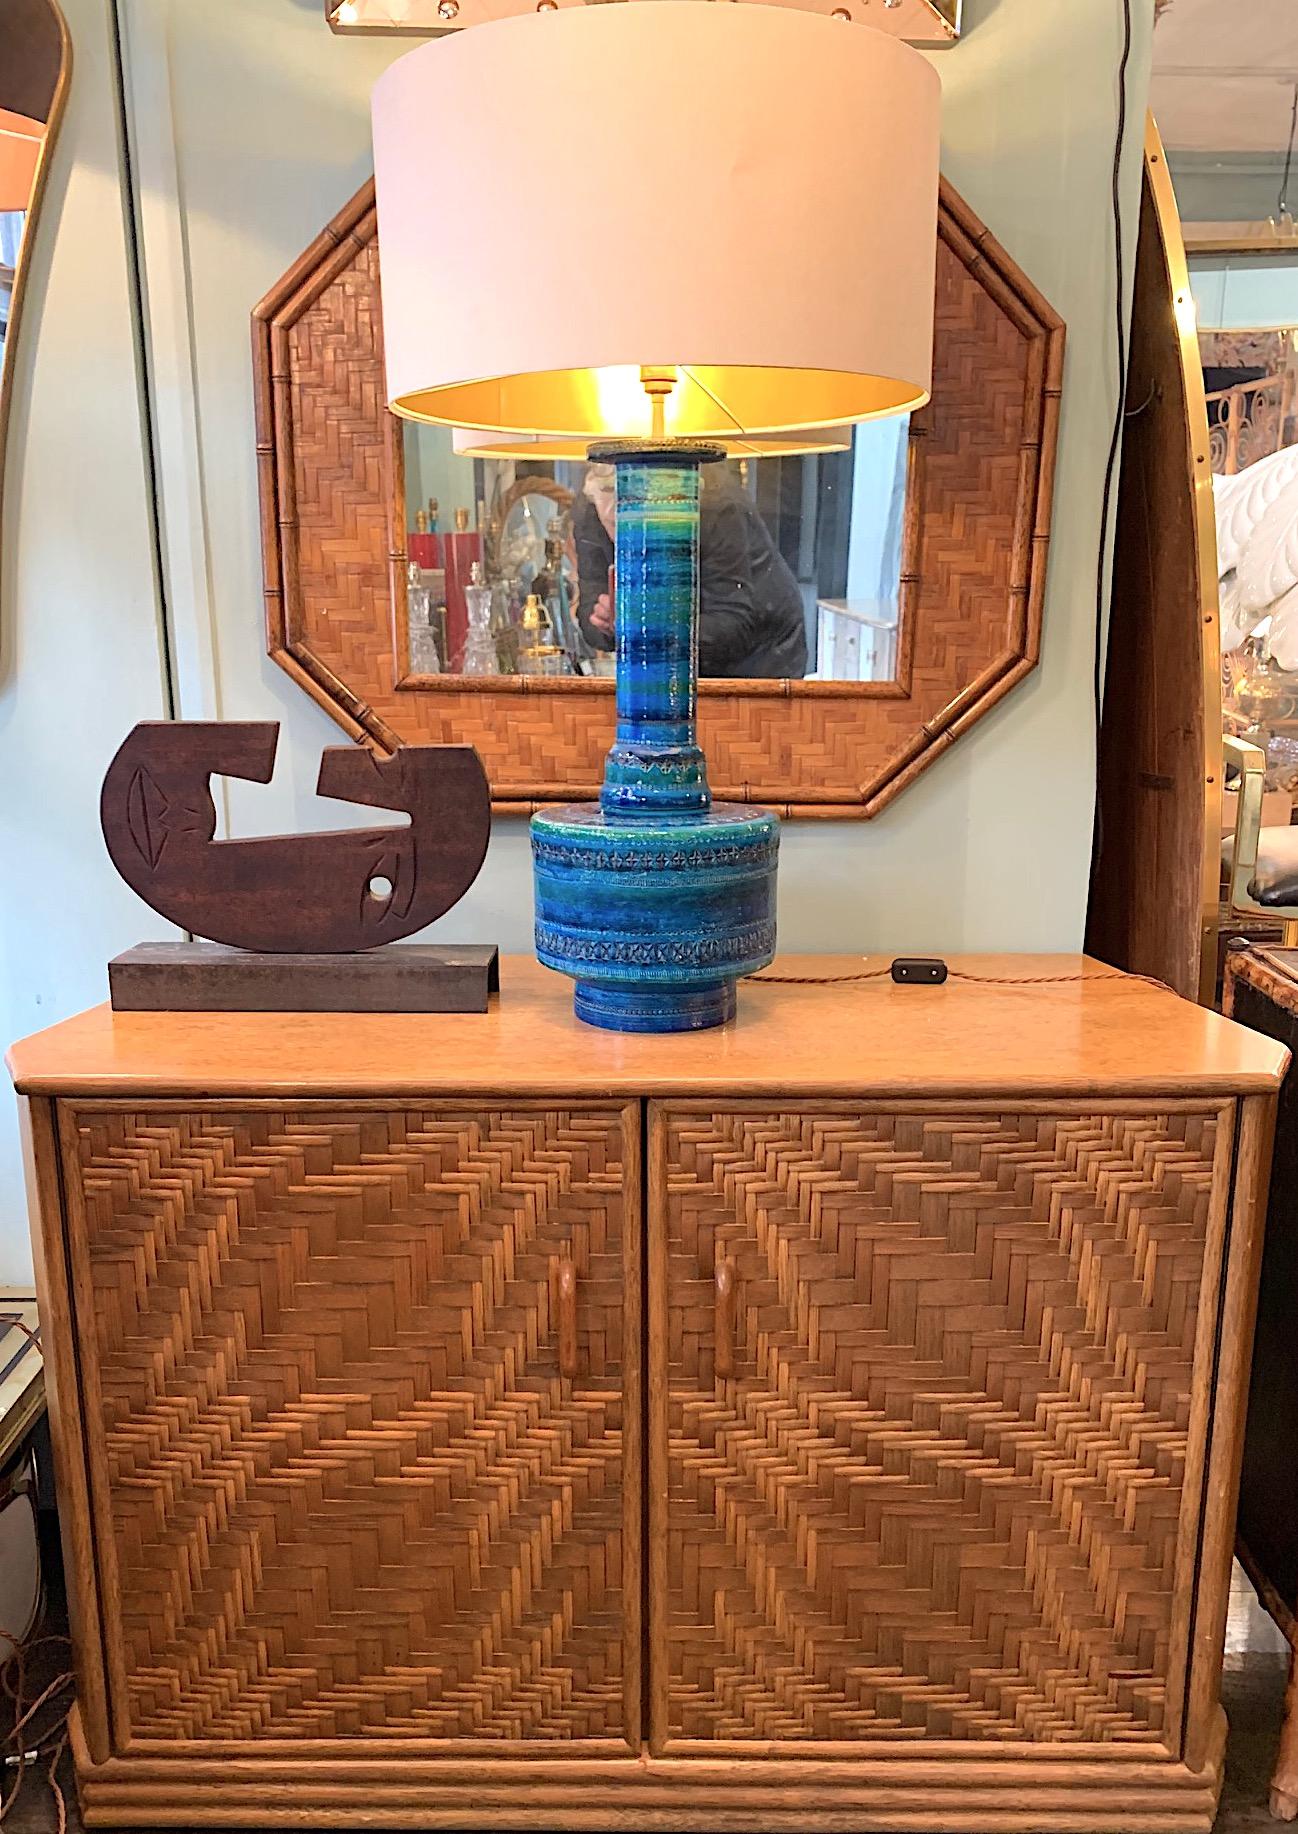 A 1970s French Riviera two door bamboo and rattan side cabinet with intricate woven detail on the doors. The door open to reveal 3 shelves and the sides have interesting angled detail so the width goes from 121cm wide at the front to 106cm wide at